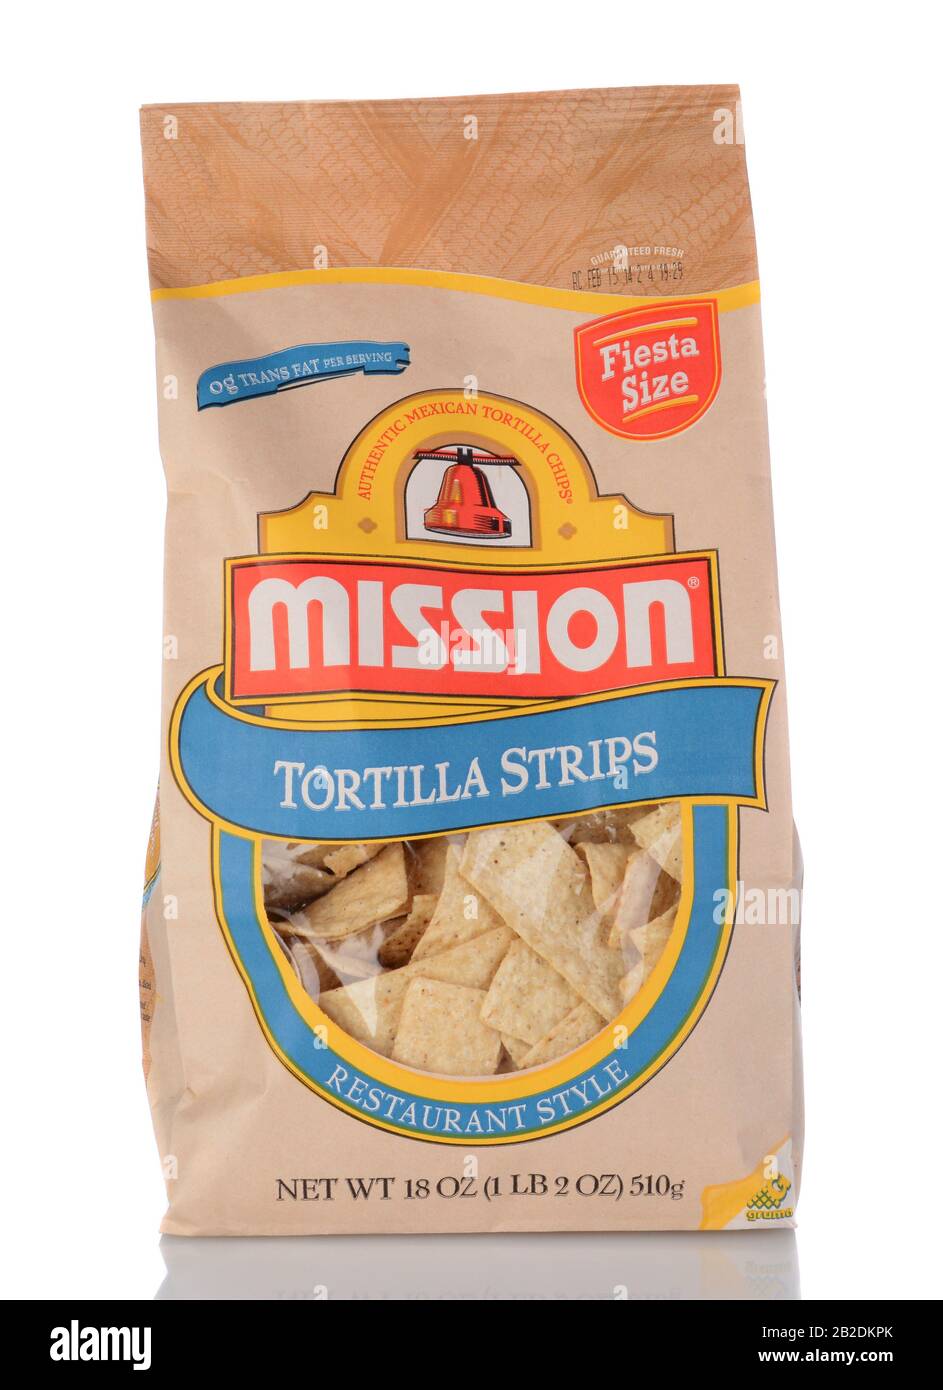 IRVINE, CA - January 05, 2014: An 18 ounce bag of Mission Tortilla Strips. Mission Foods has a range of tortilla products ranging from the traditional Stock Photo